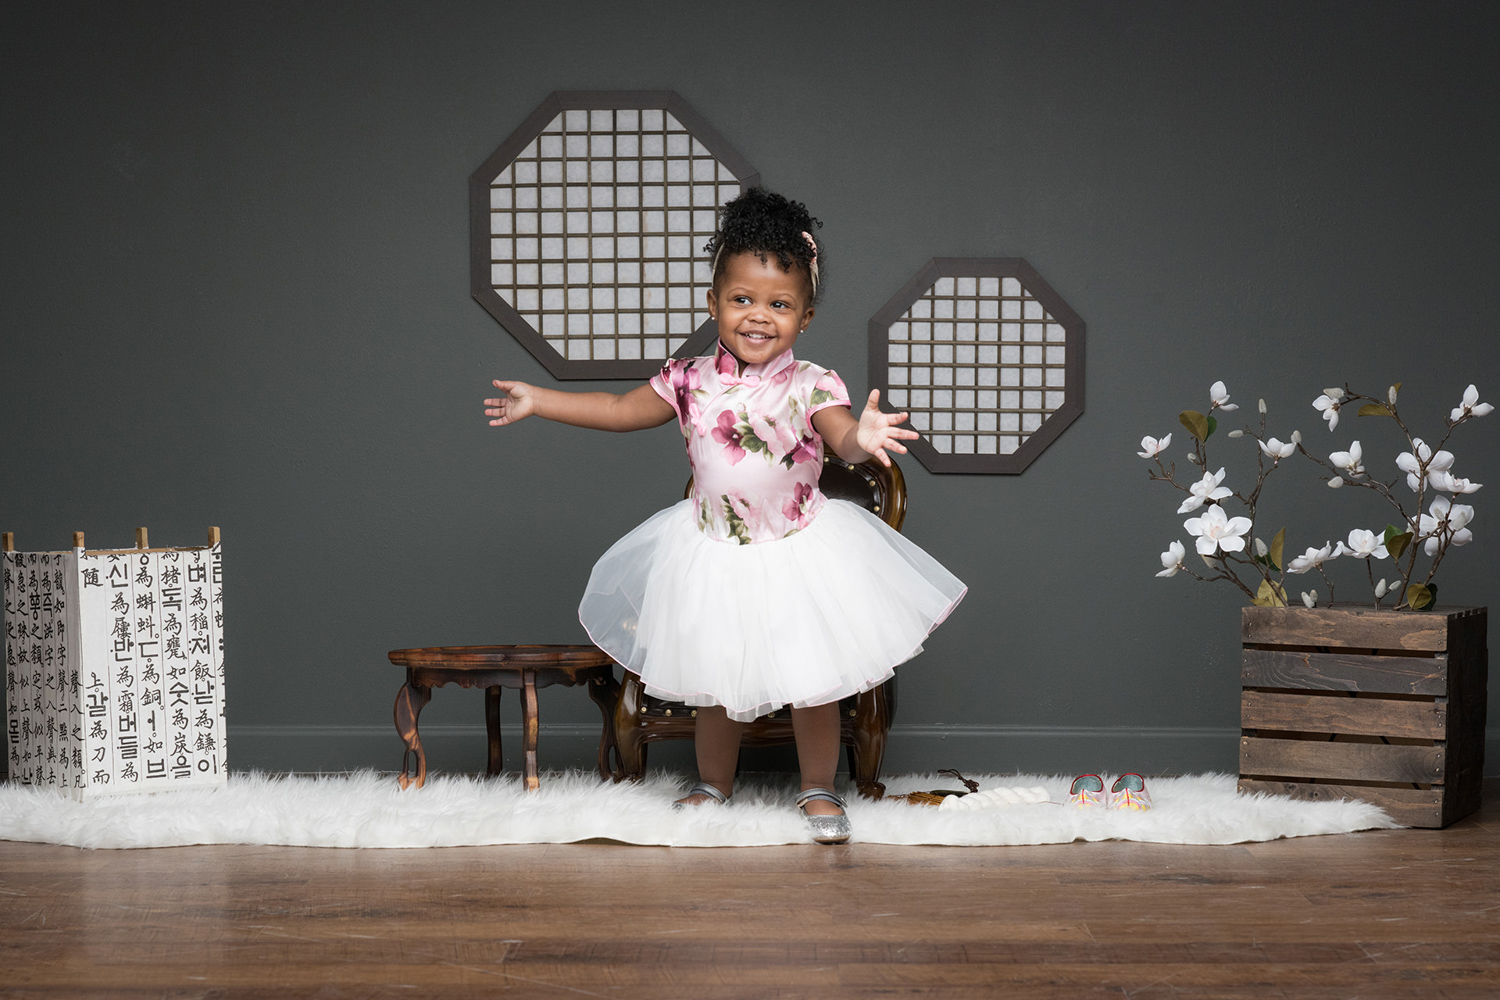 Sophia dances and smiles during a family photoshoot in Chicago.